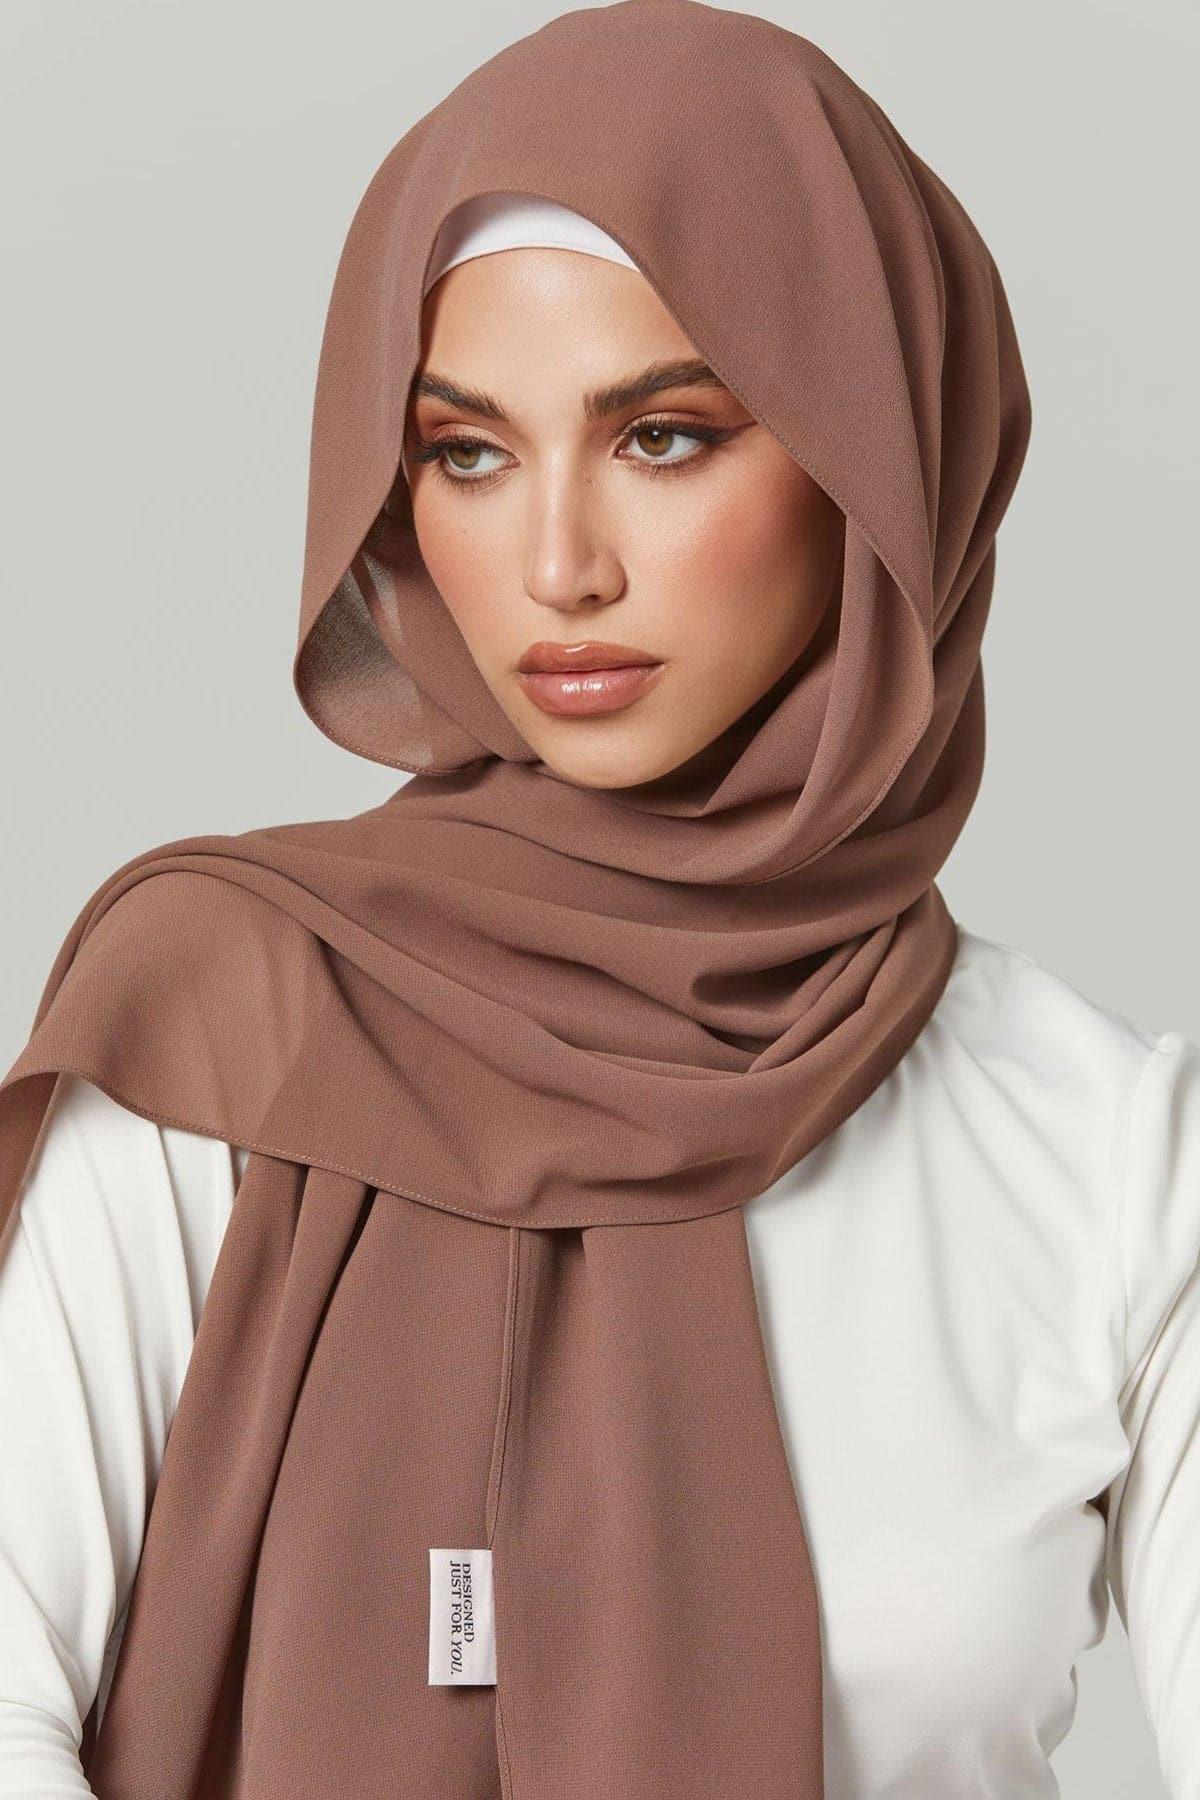 luxury comes in simplicity with @shoplbh 's korean chiffon hijabs